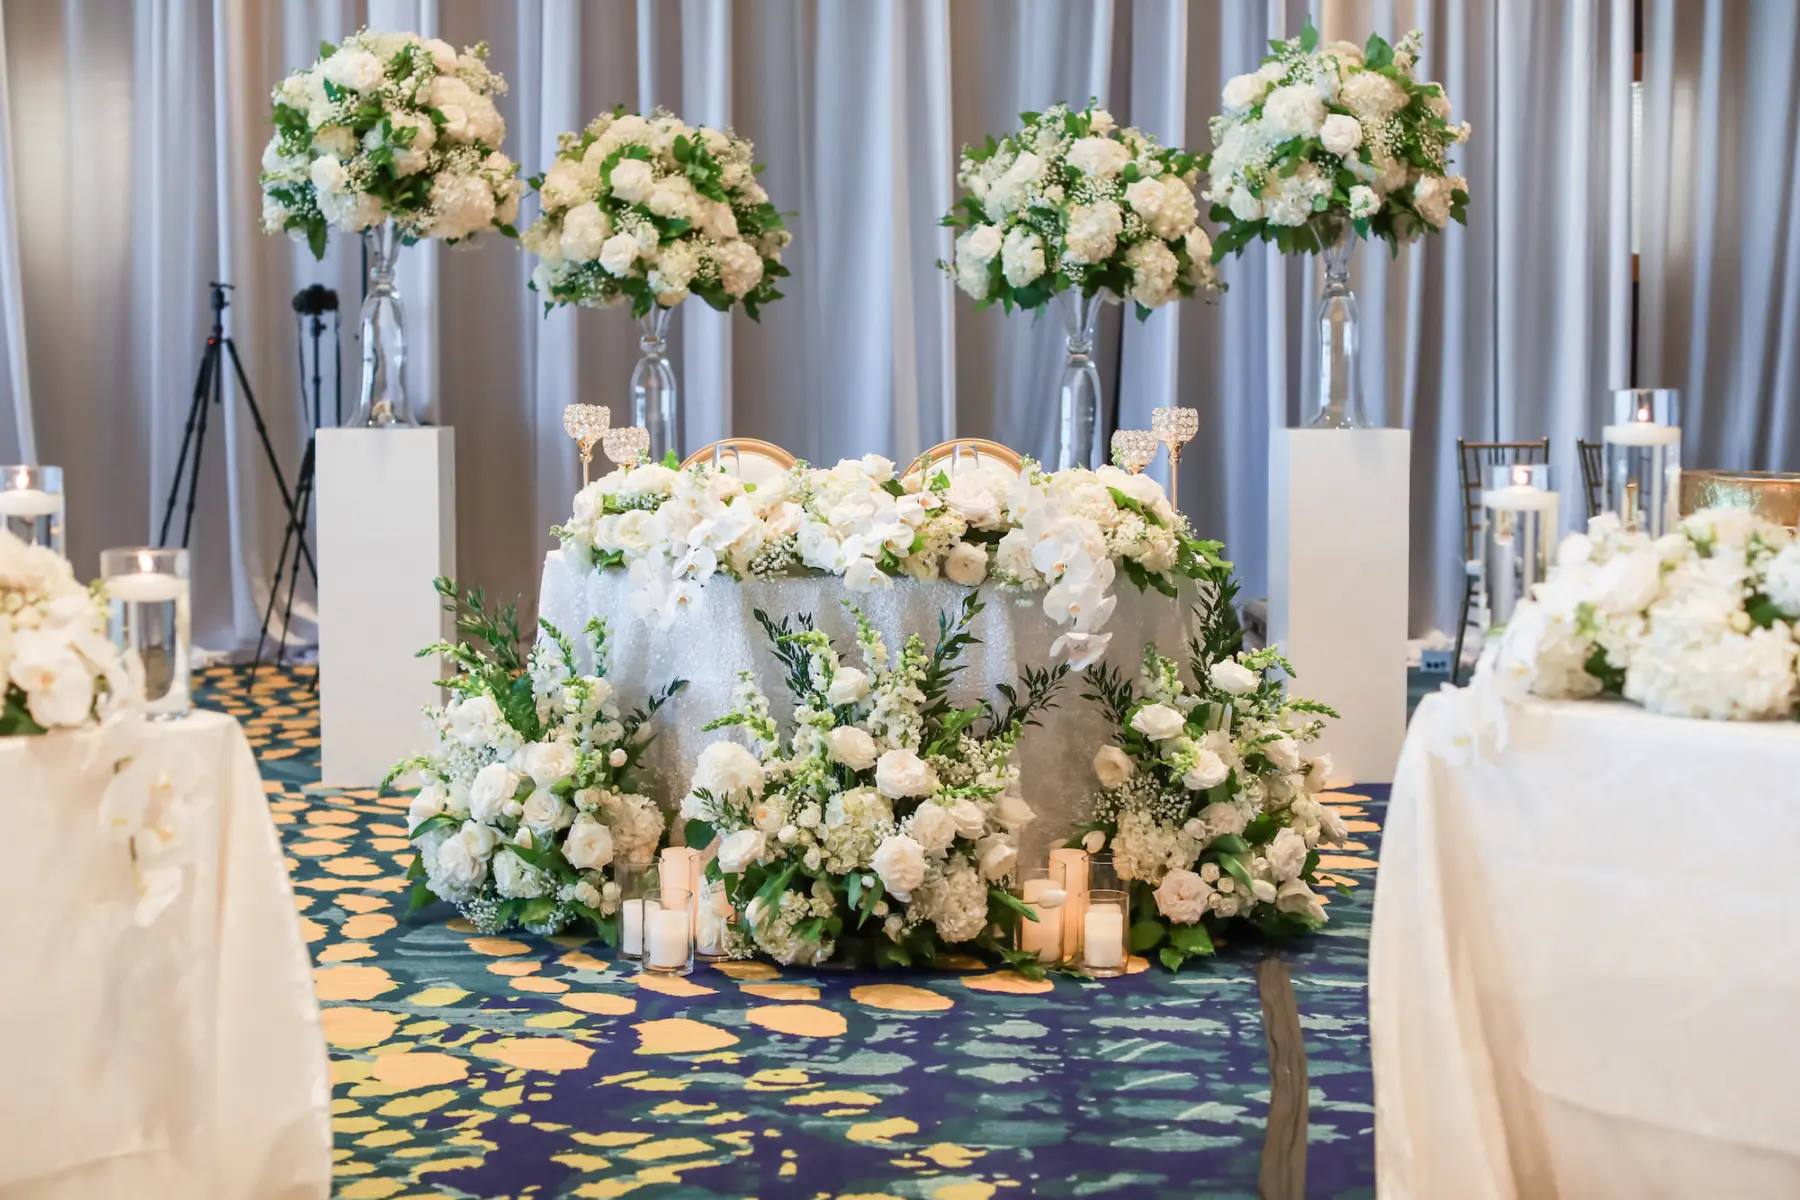 Elegant Monochromatic White and Gold Ballroom Wedding Reception Sweetheart Table Ideas | White Rose, Hydrangea, and Greenery Decor Inspiration | Gold Chiavari Chairs | Tampa Bay Outside Of The Box Rentals | Clearwater Event Planner Breezin Weddings